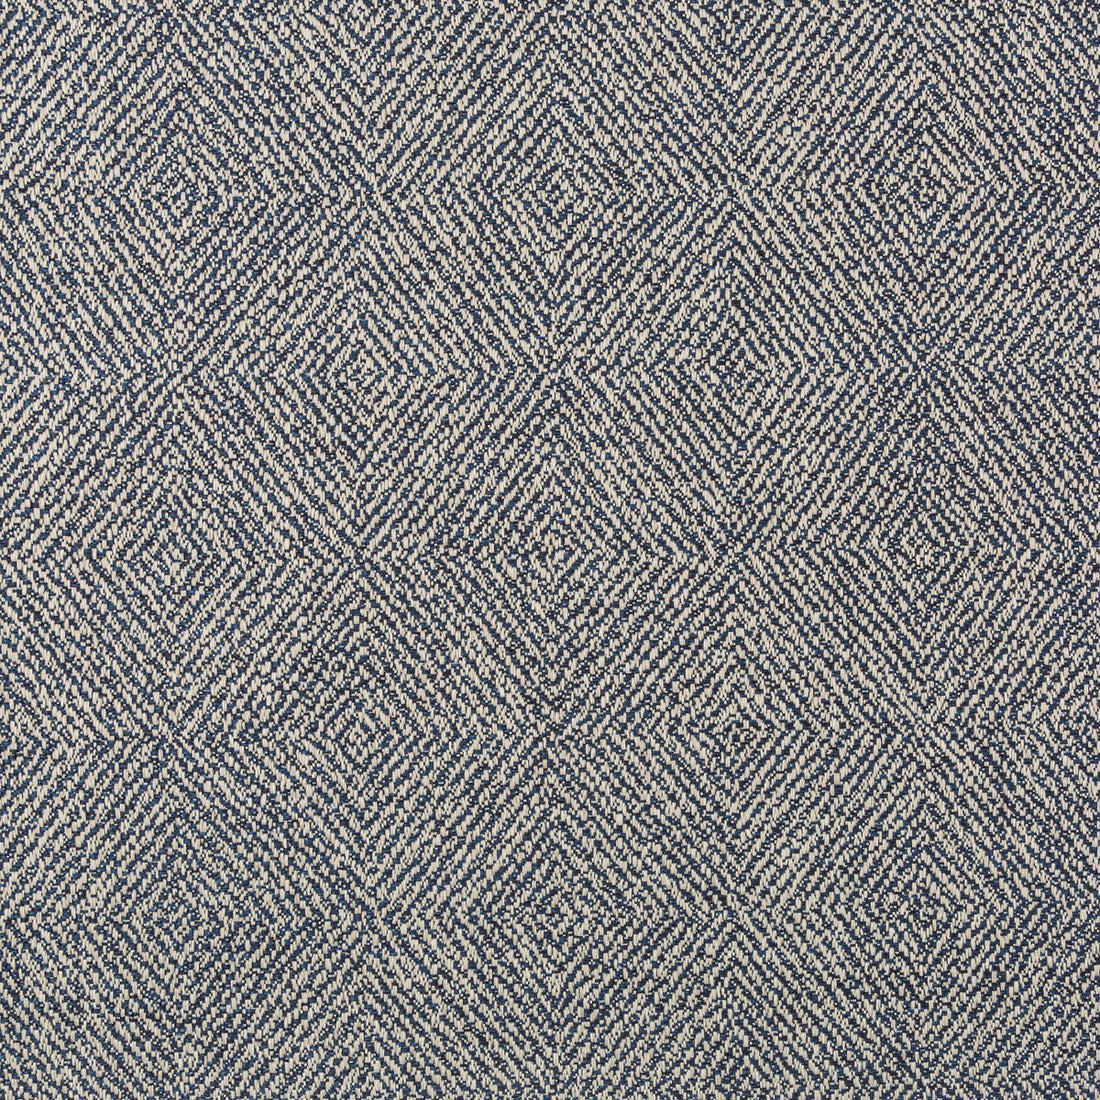 Egress fabric in denim color - pattern 35747.516.0 - by Kravet Couture in the Vista collection